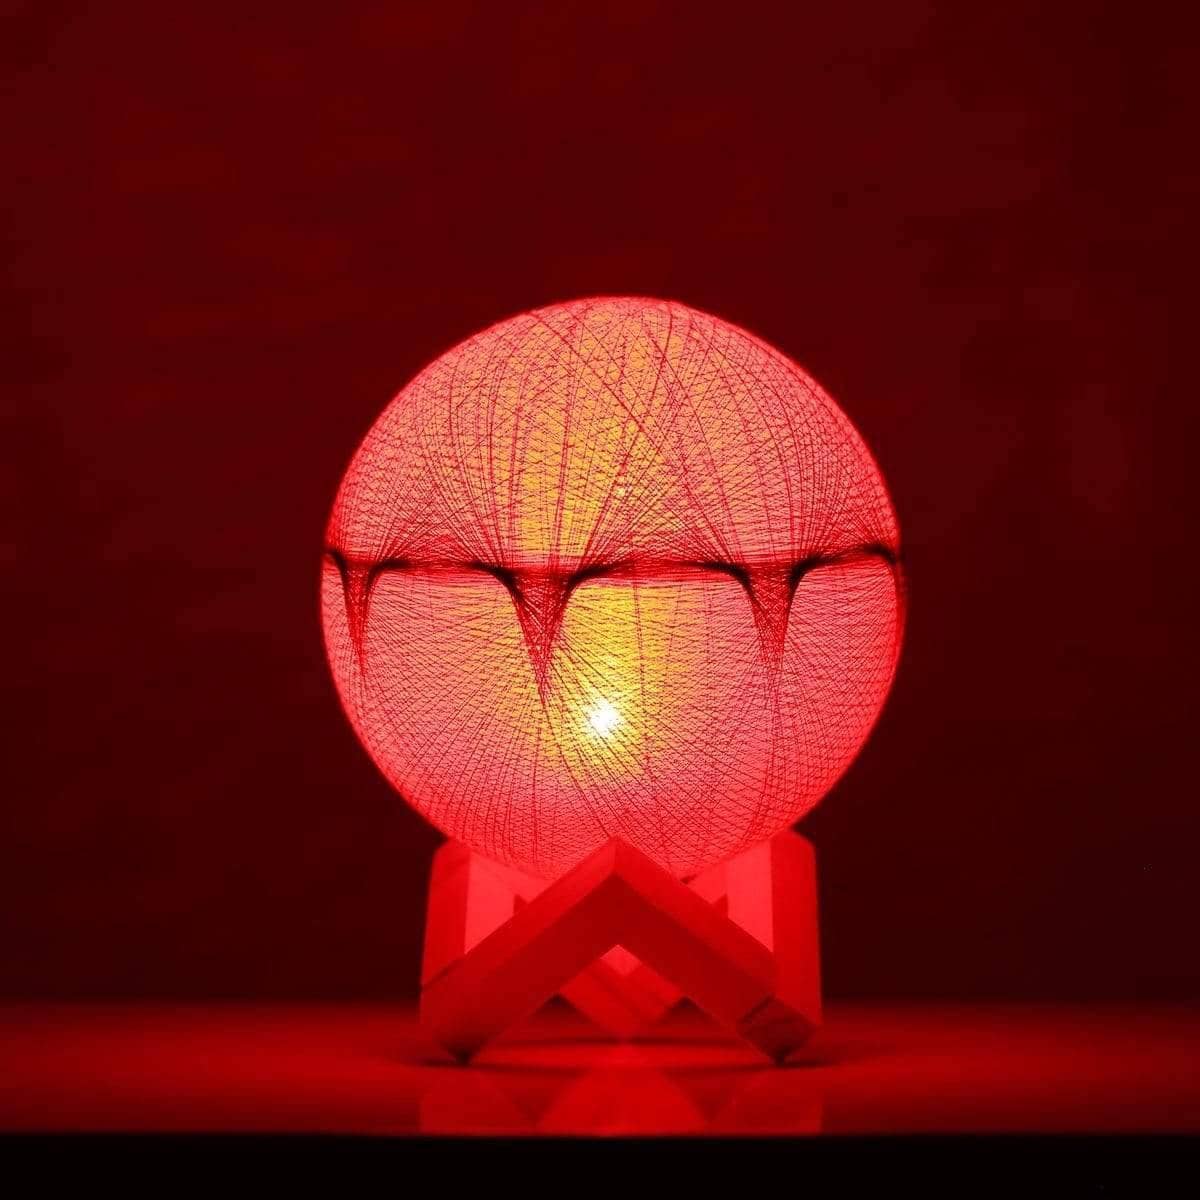 Artisan-Crafted Woolen Yarn Lunar Lamp: Soft Glow and Decorative Delight